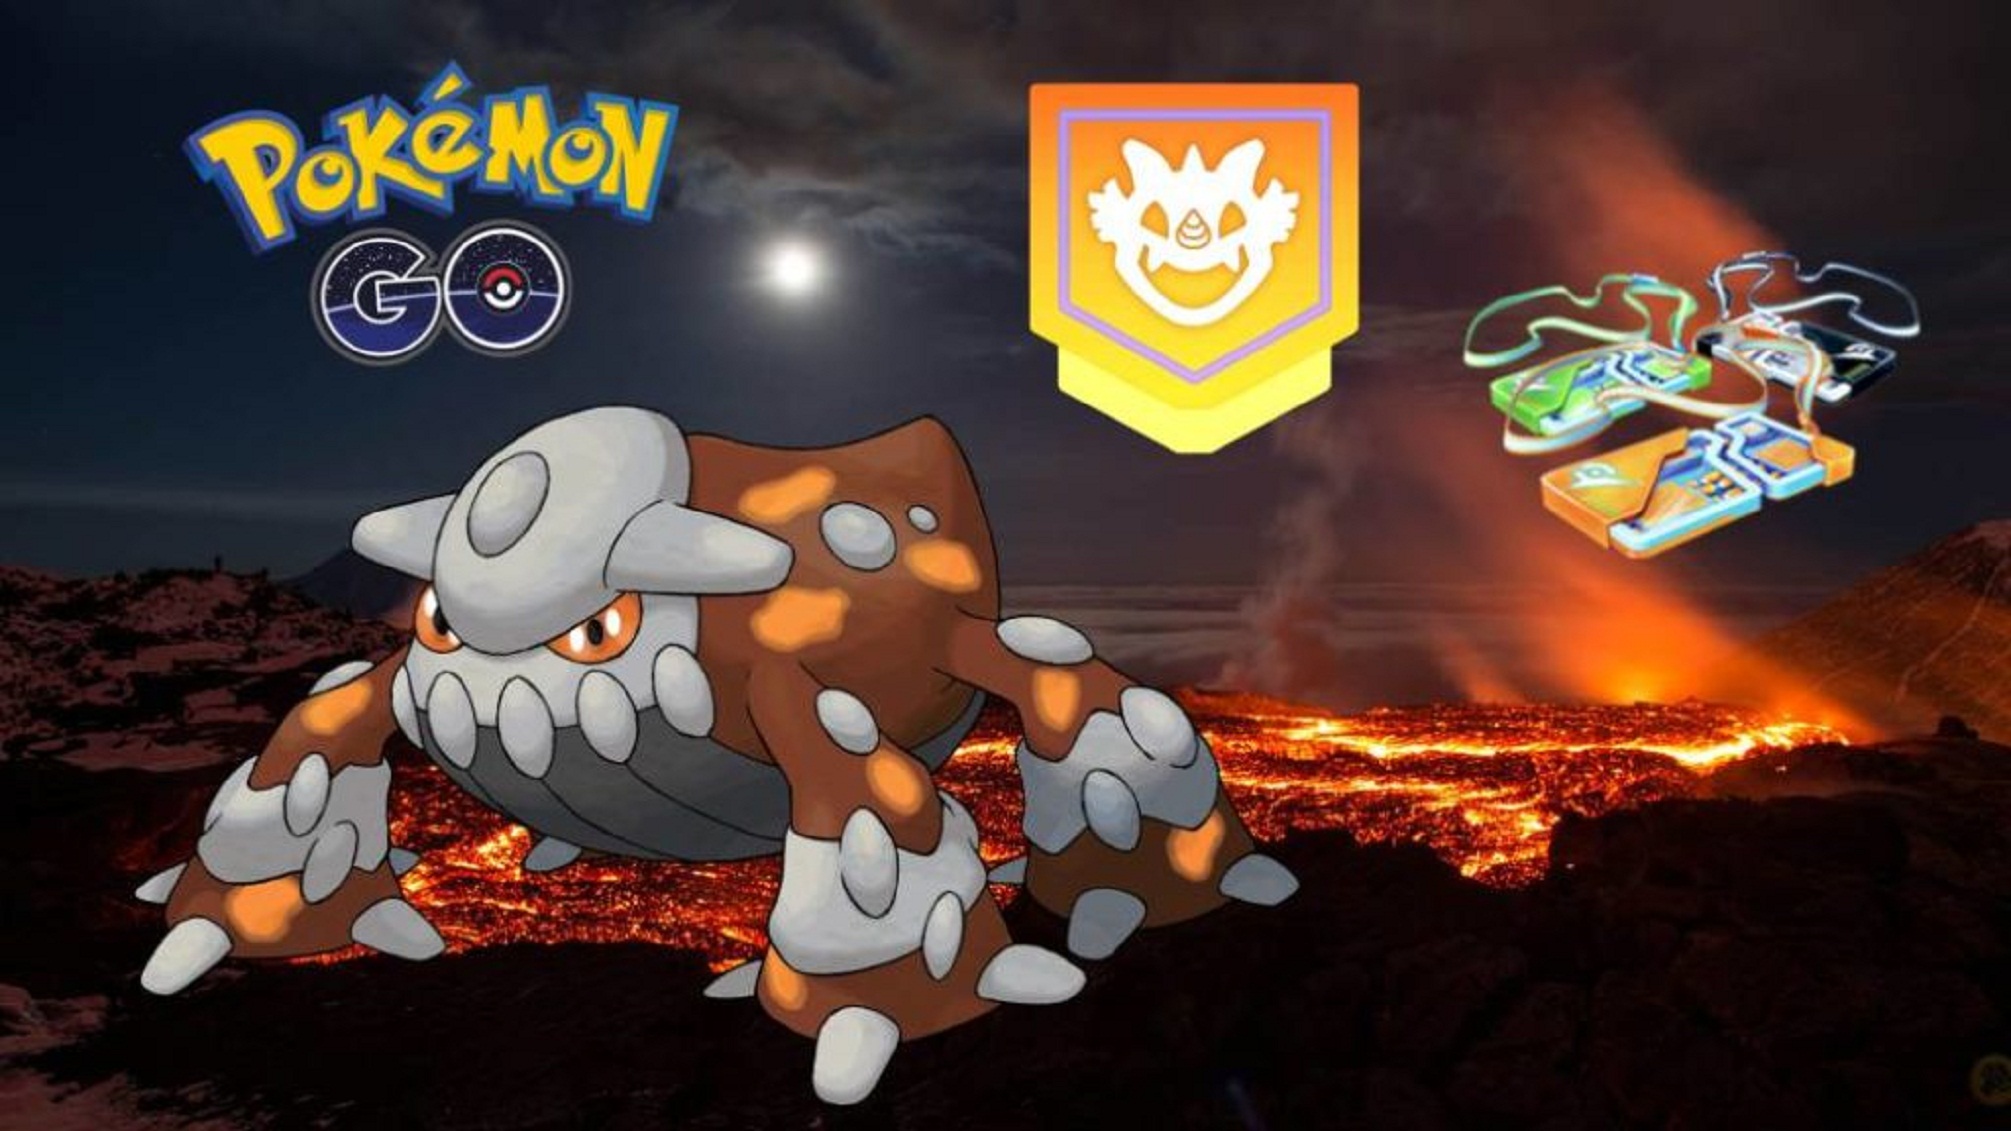 Pokemon Go: The Legendary Heatran Is Back! The Guide On How To Locate And Defeat The Lava Dome Pokemon